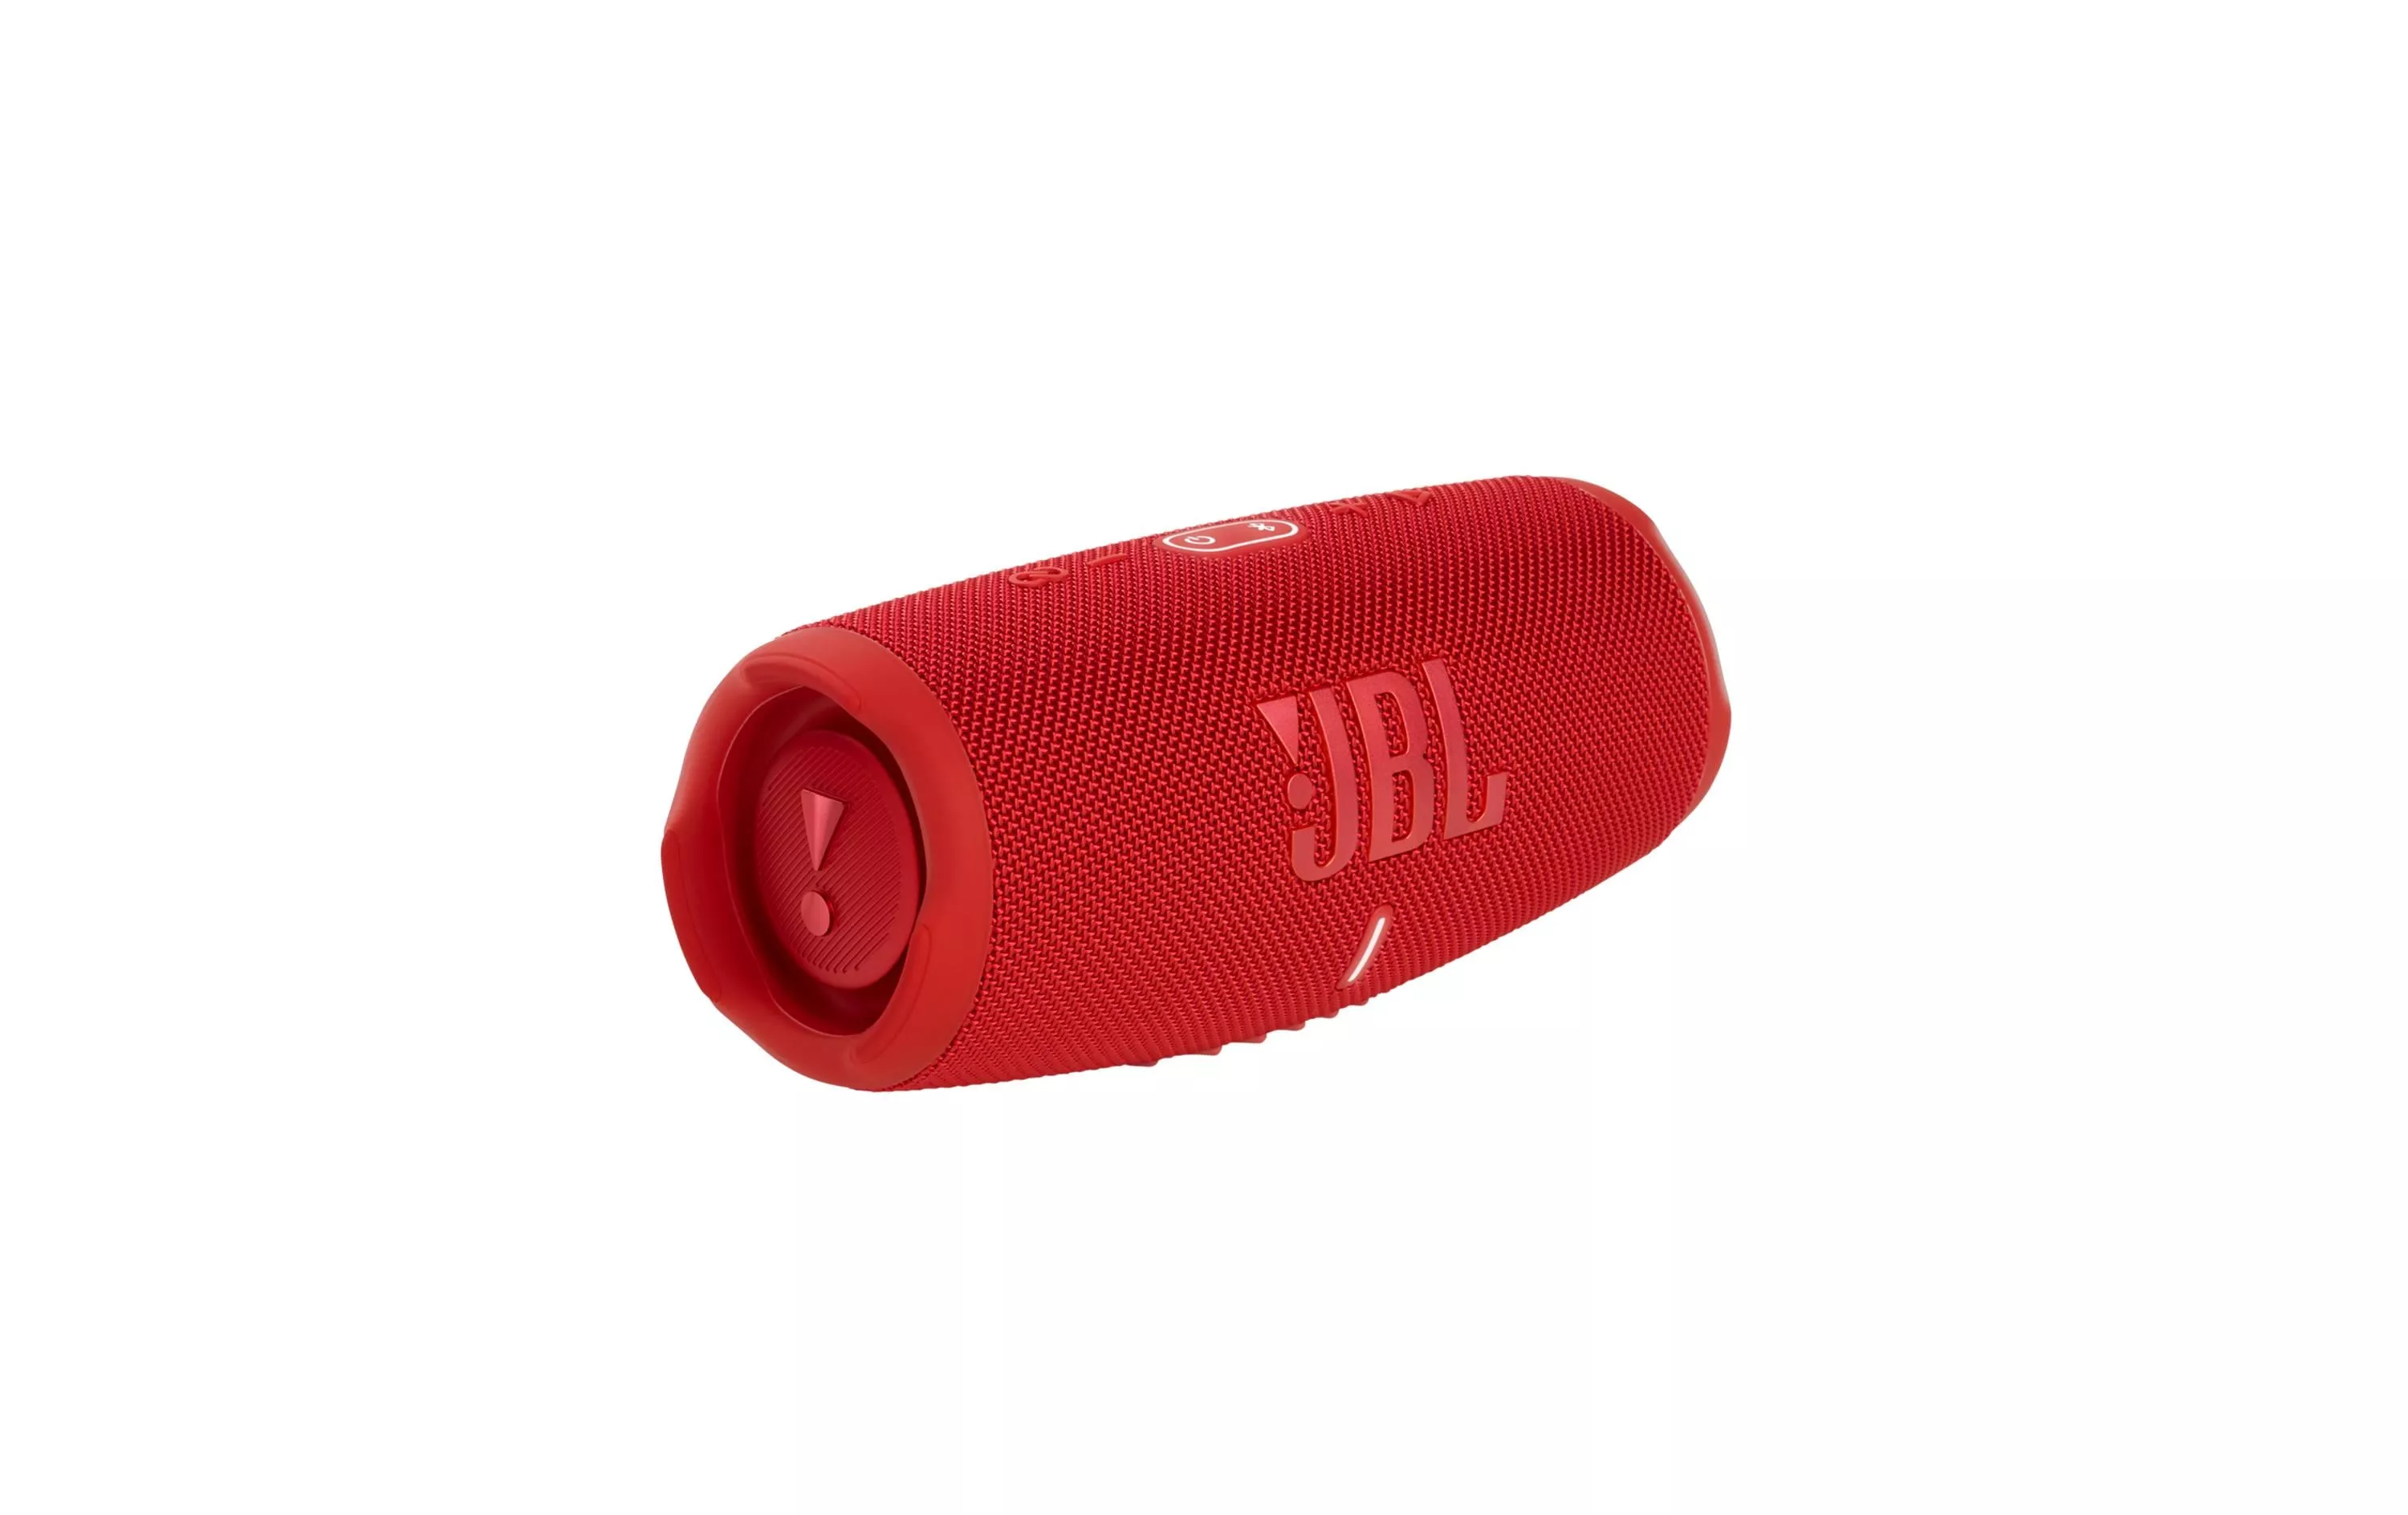 Altoparlante JBL Bluetooth Charge 5 Rosso